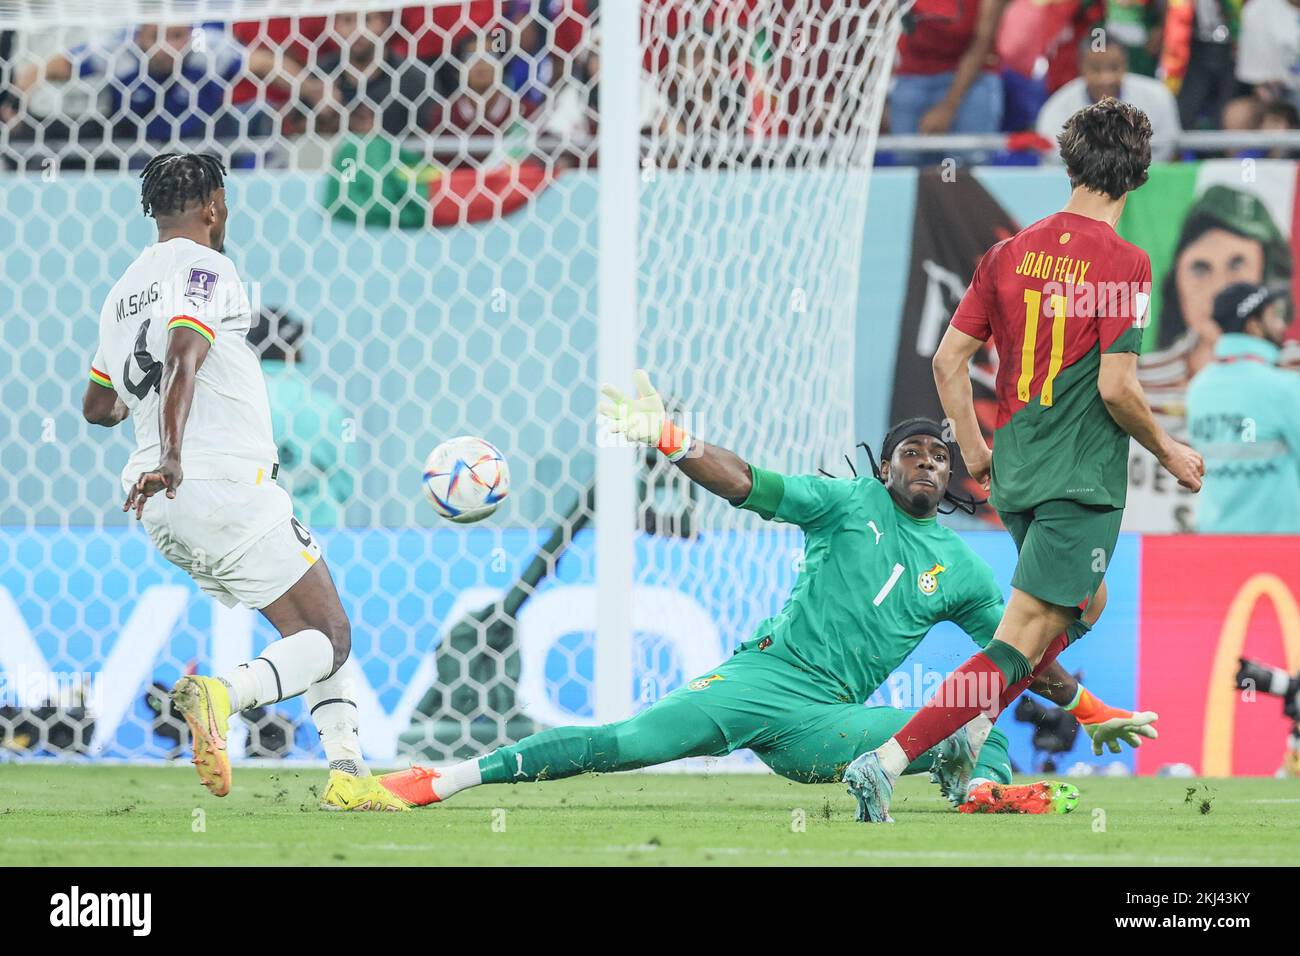 Portuguese Joao Felix scores a goal during a soccer game between Portugal and Ghana, in Group H of the FIFA 2022 World Cup in Doha, State of Qatar on Thursday 24 November 2022. BELGA PHOTO BRUNO FAHY Credit: Belga News Agency/Alamy Live News Stock Photo